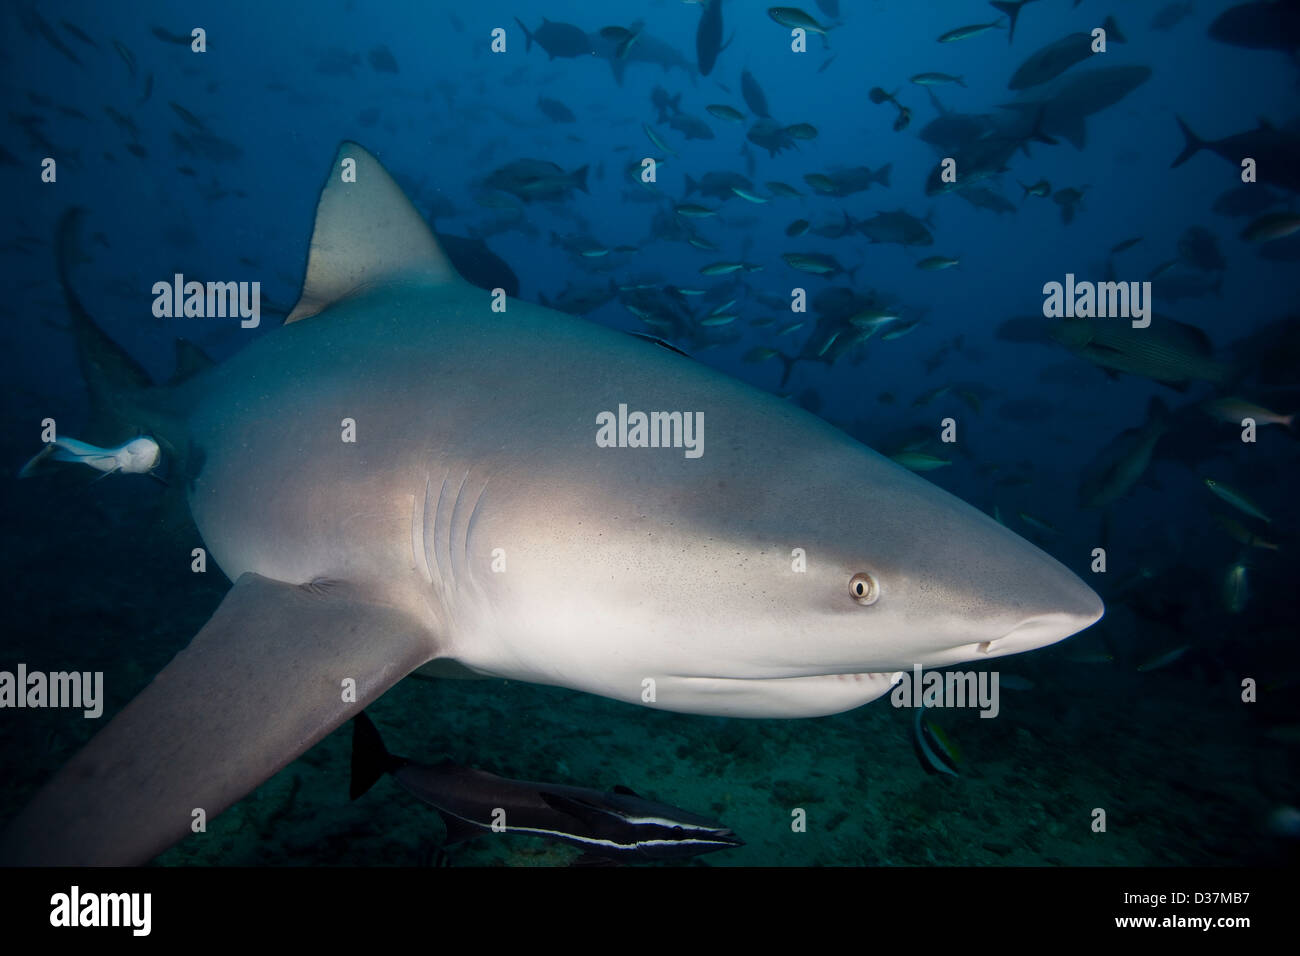 Shark swimming underwater Banque D'Images